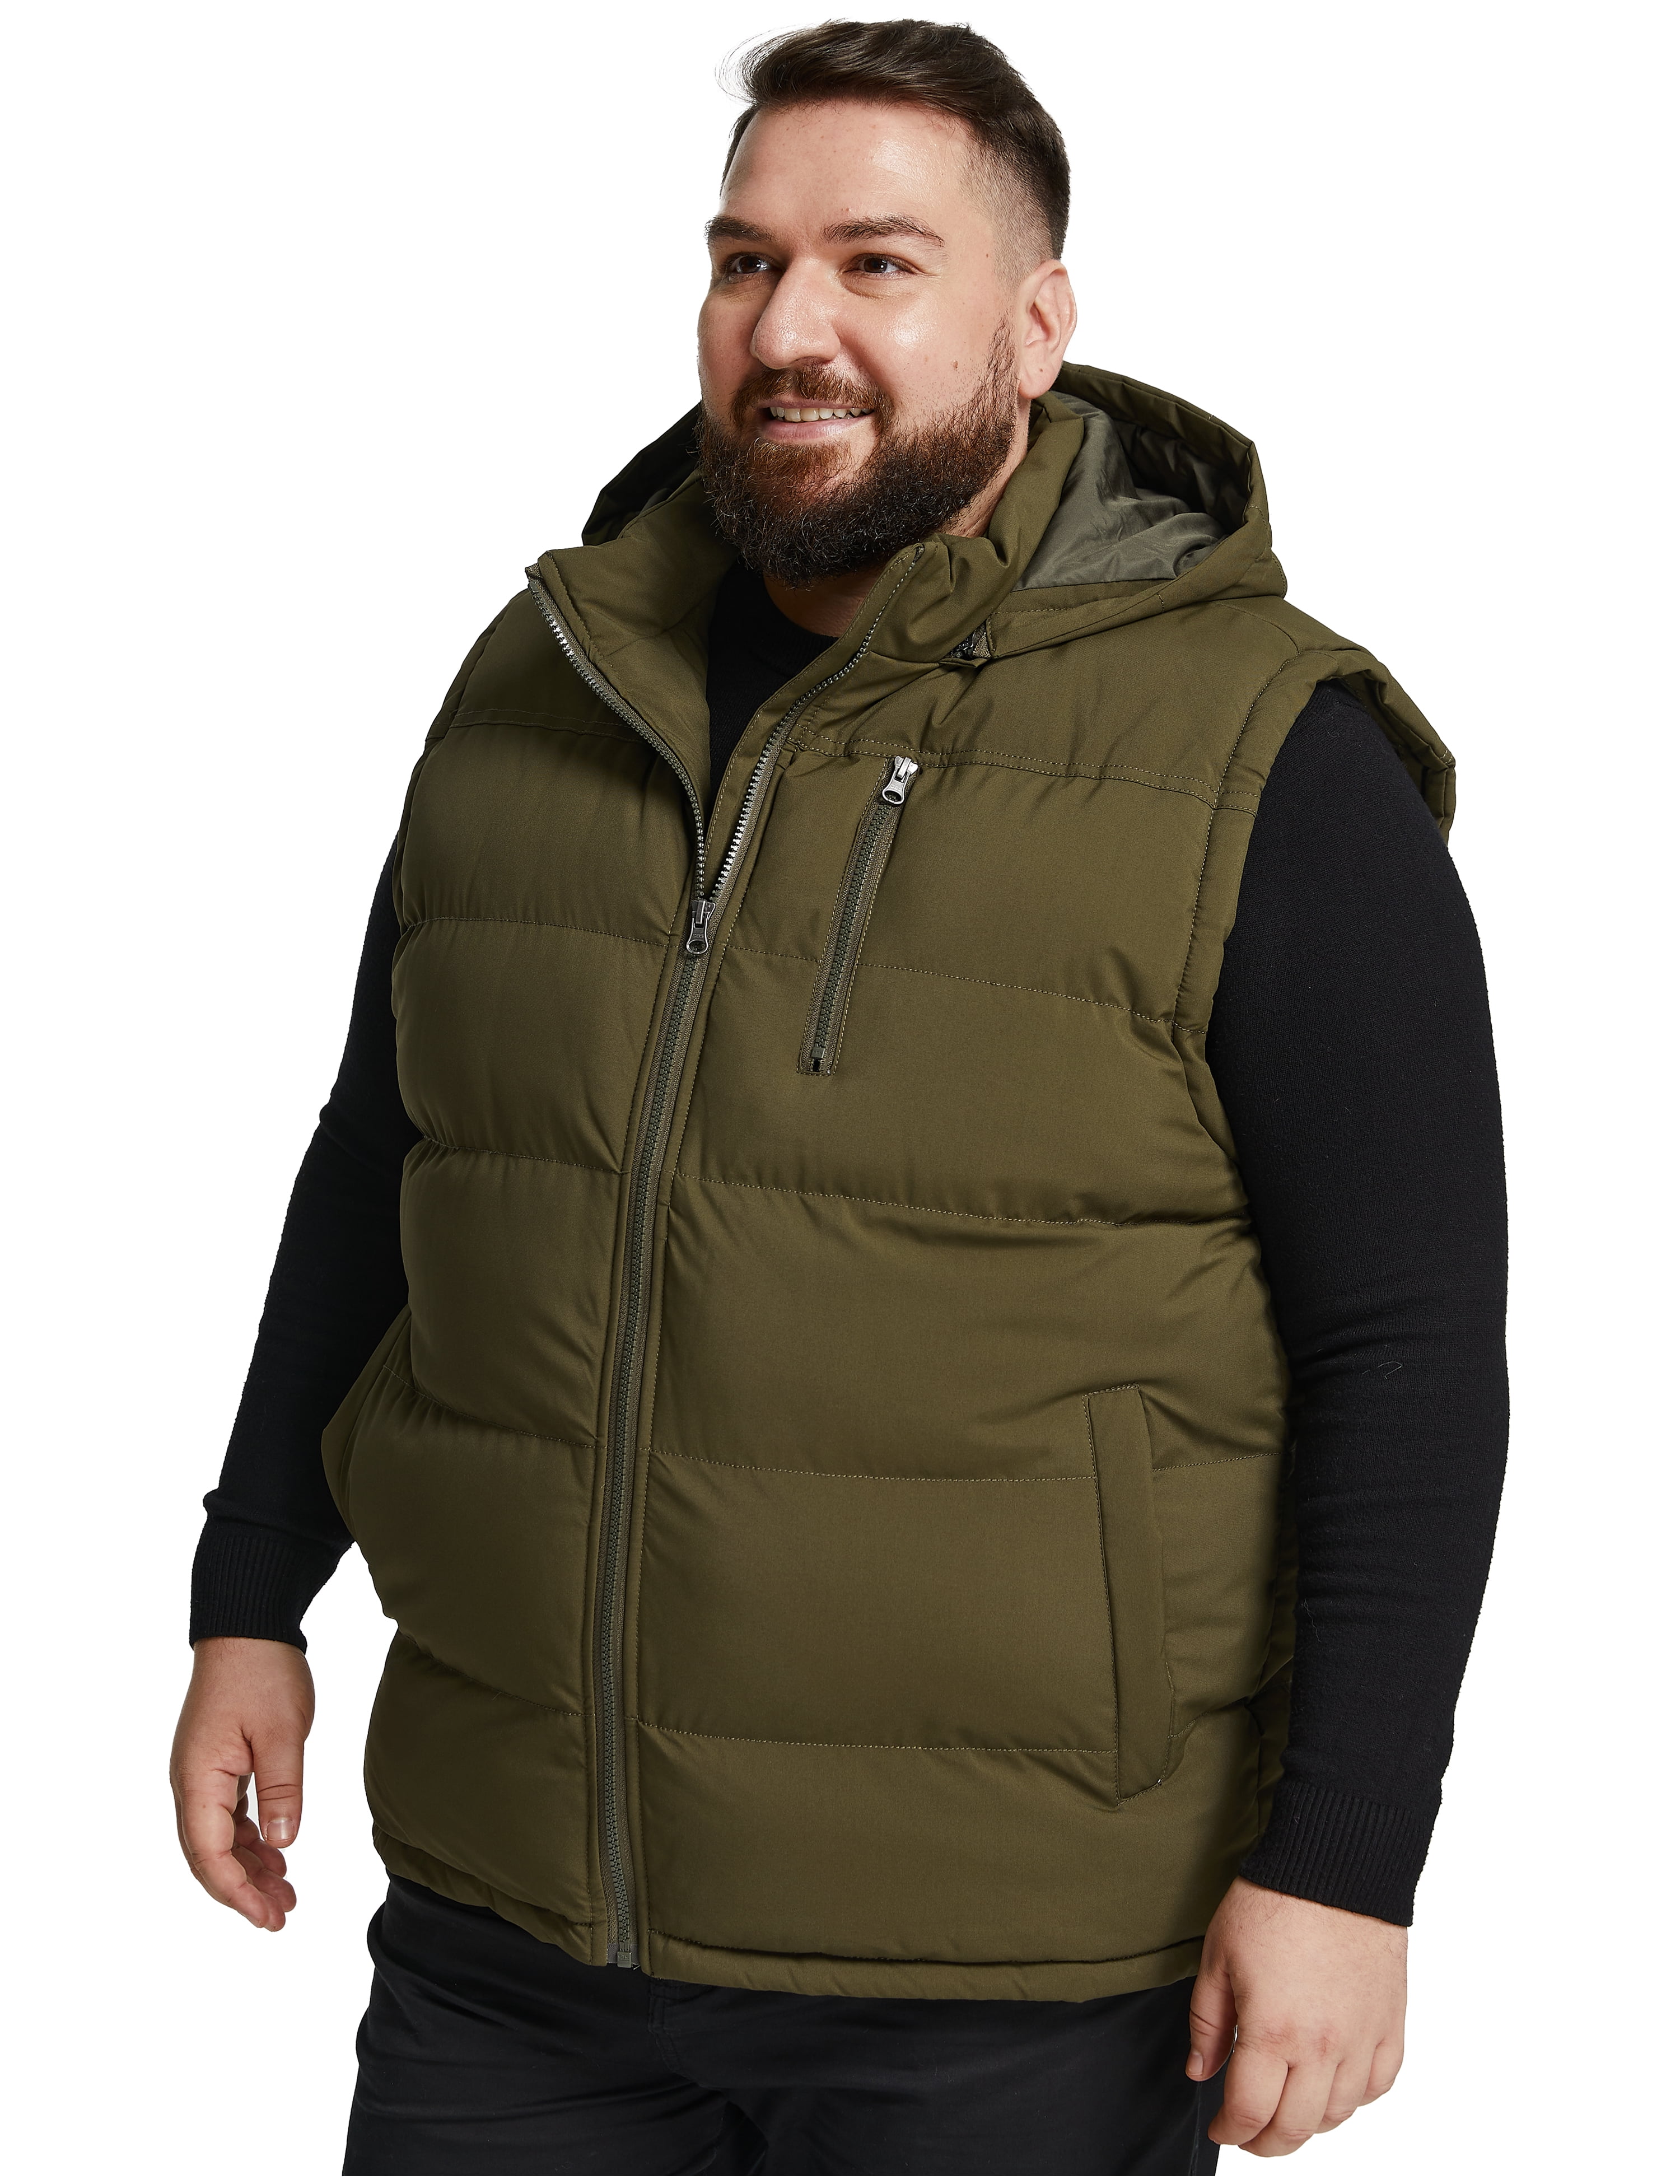 Soularge Men's Big and Tall Fall Military Pure Cotton Utility Jacket Outwear